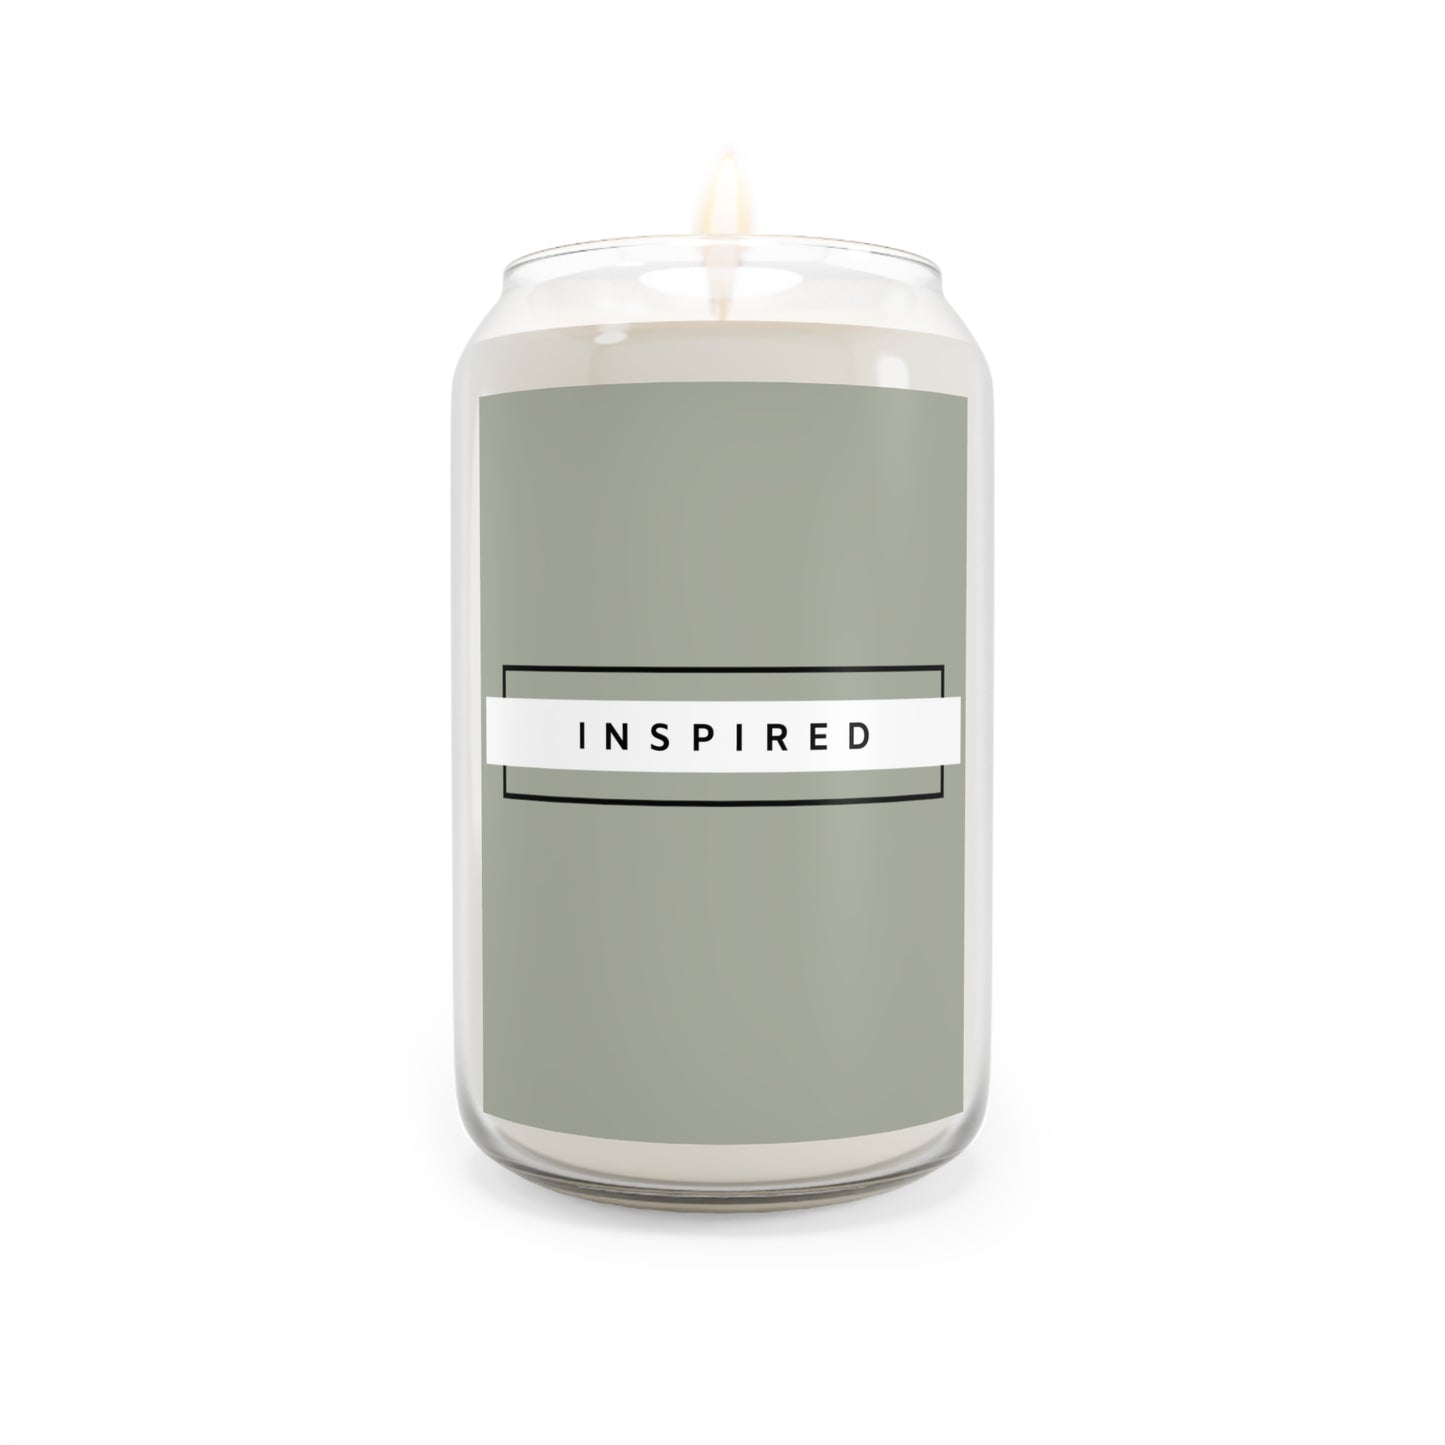 INSPIRED Big Scented Candle, 13.75oz